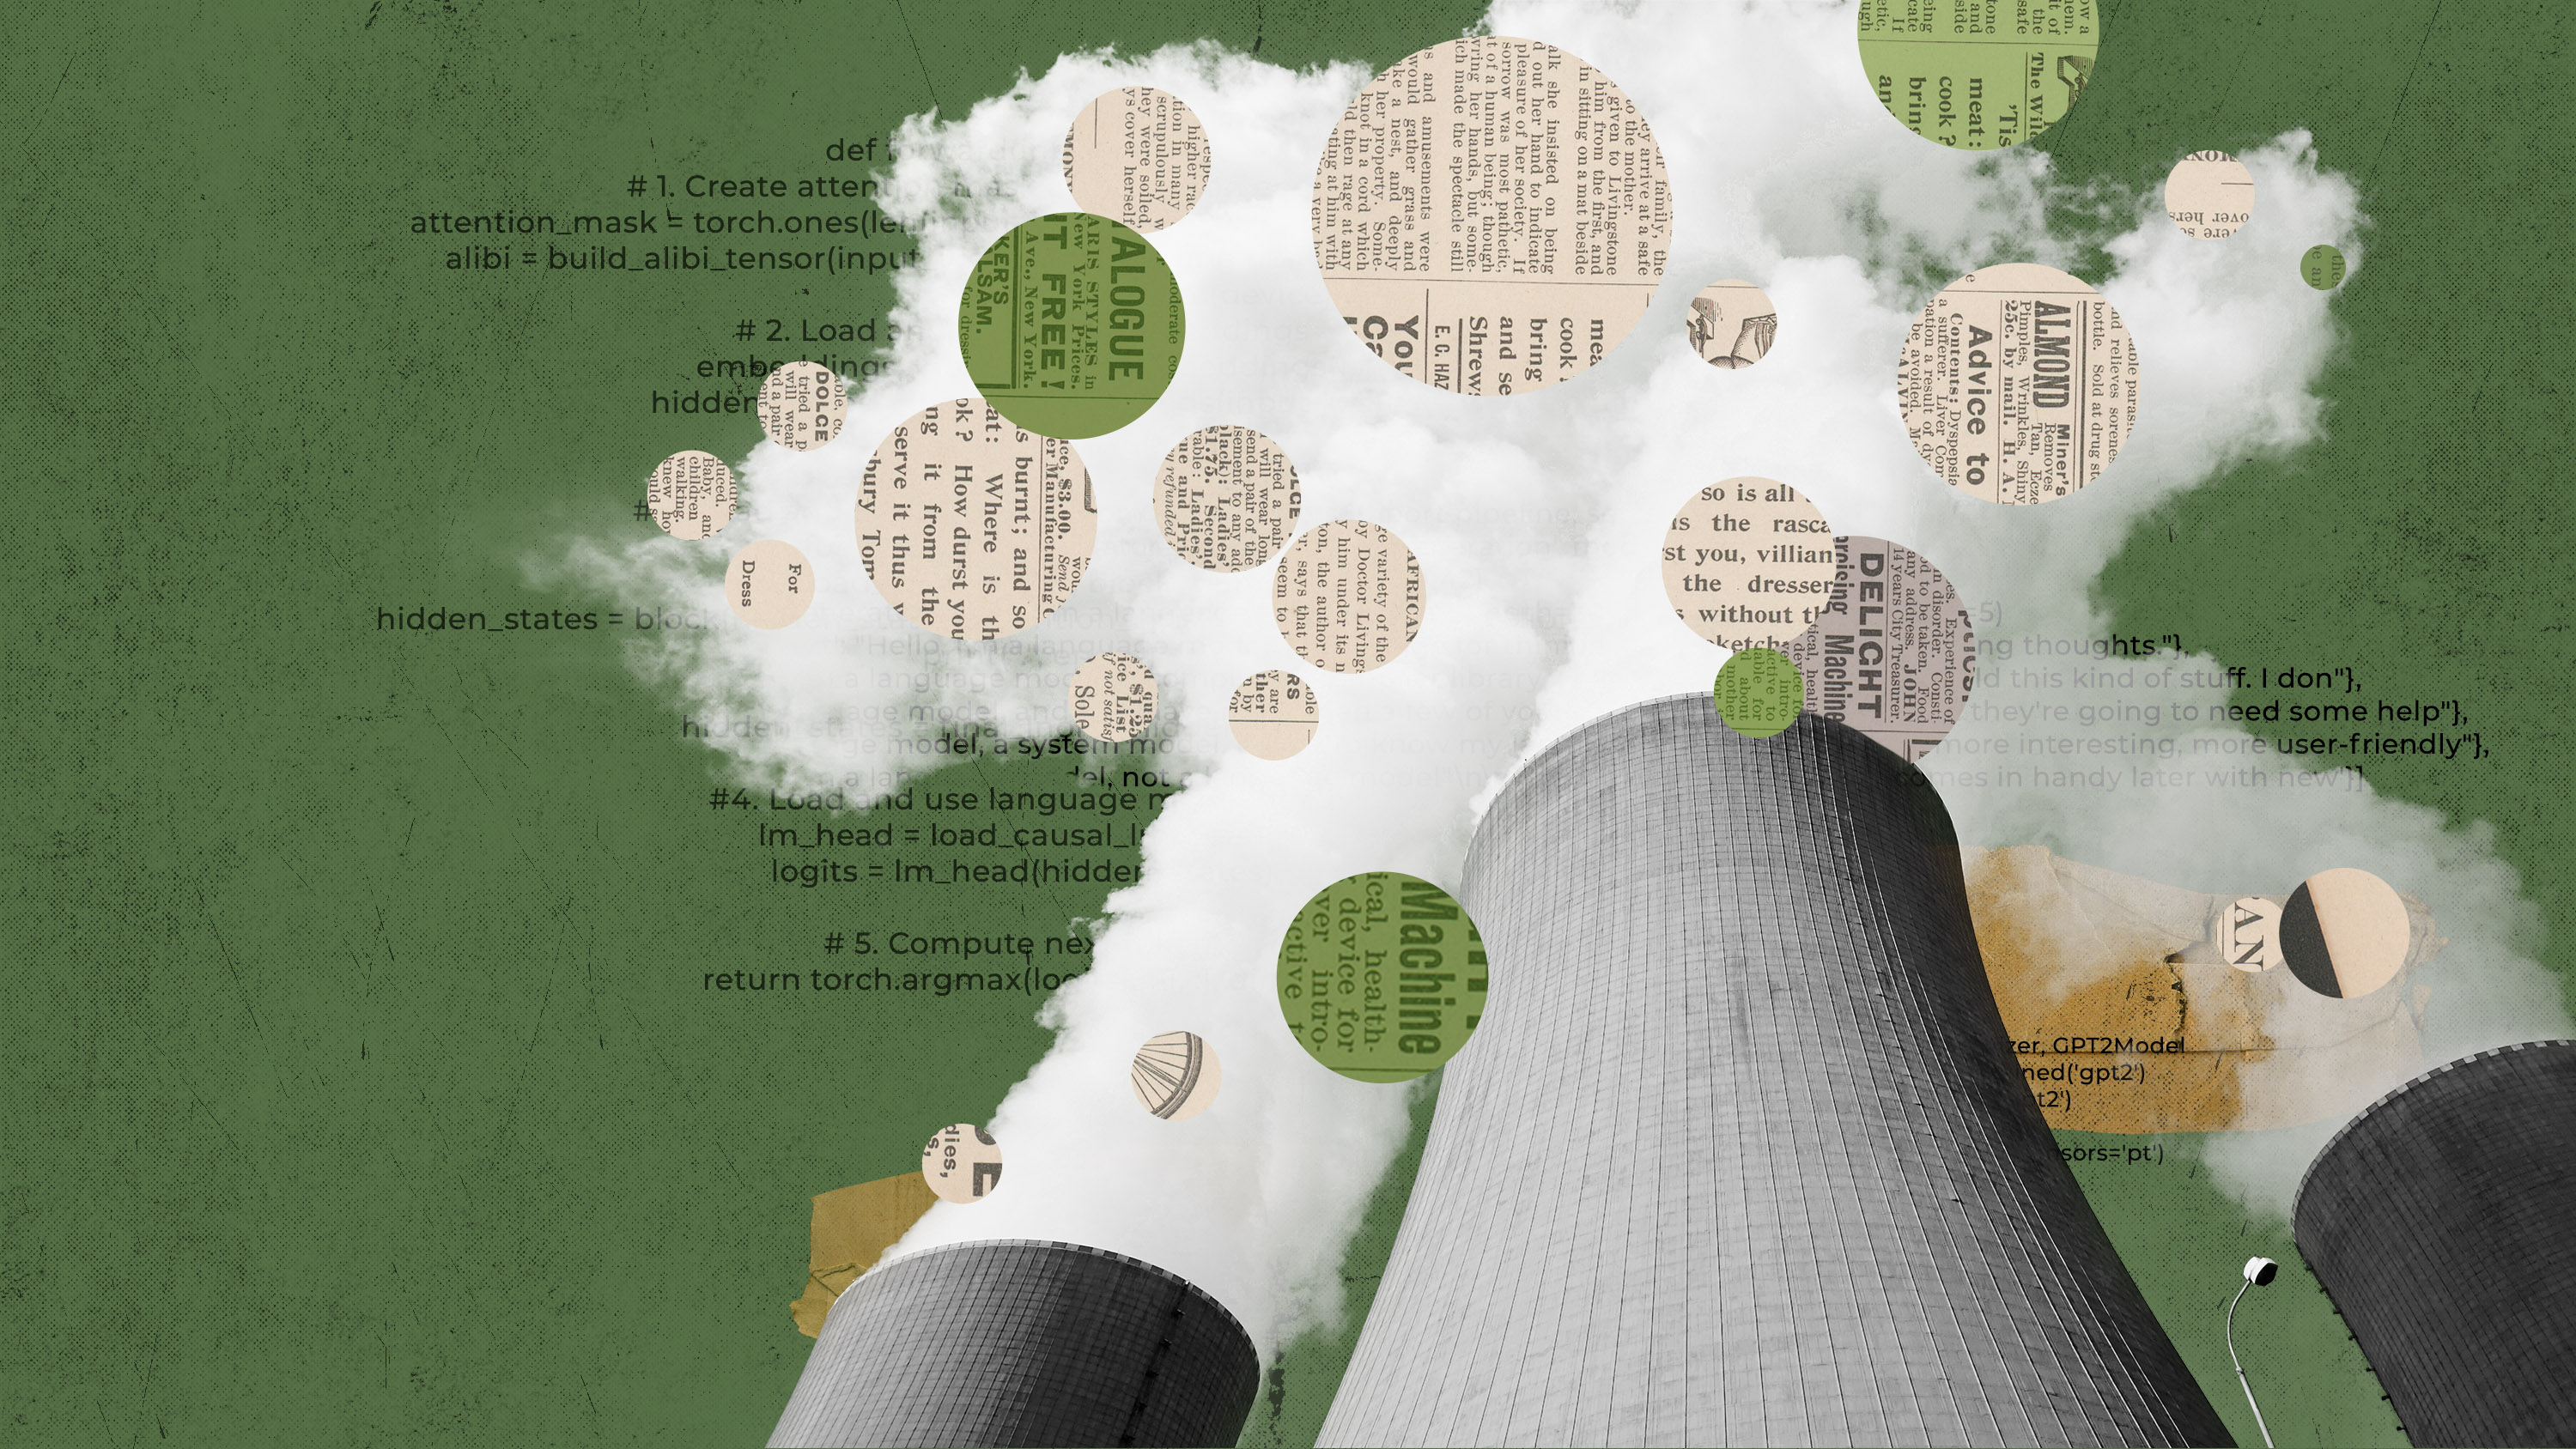 illustration of language emissions coming out of nuclear silos